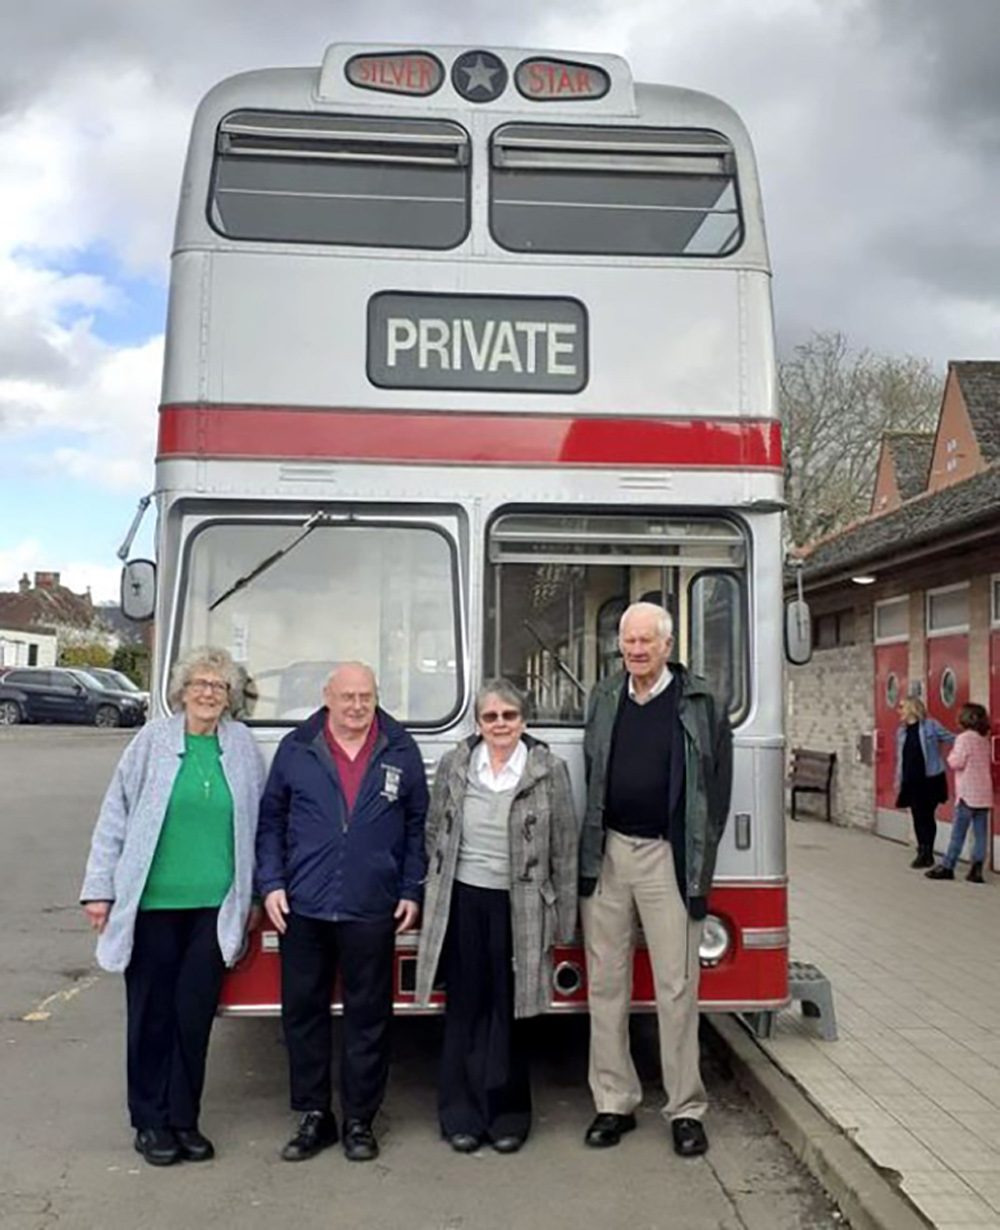 The four remaining members of Silver Star Company staff: (l-r) Mary Dixon, Jack Parsons, who restored the bus shown with his wife, Yvonne Allen and Dave Ashburner